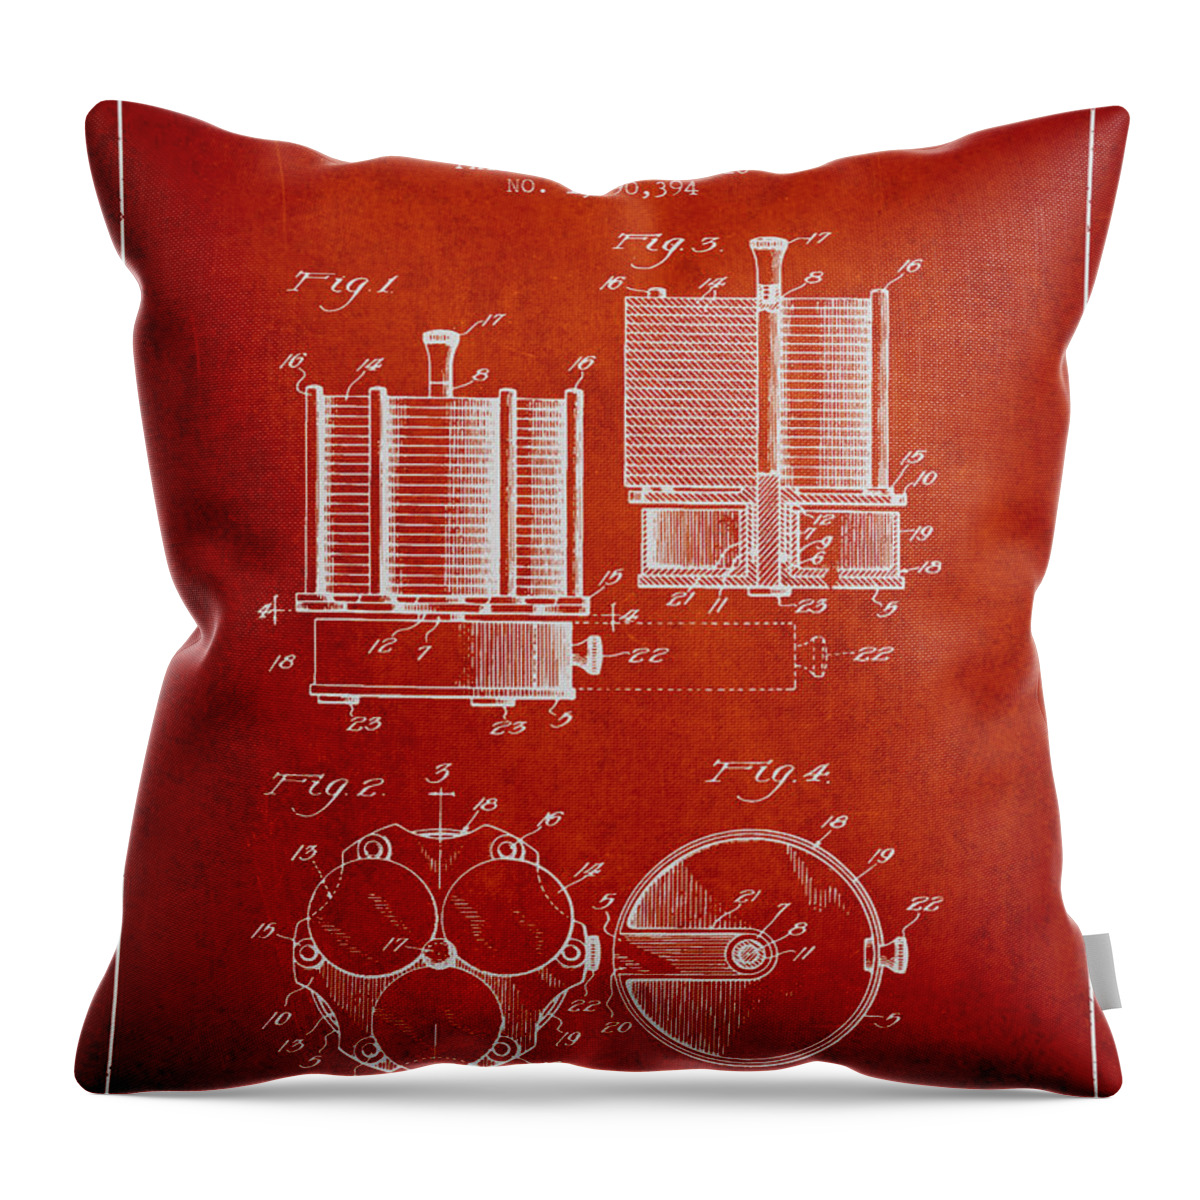 Poker Throw Pillow featuring the digital art Poker Chip Set Patent from 1928 - Red by Aged Pixel